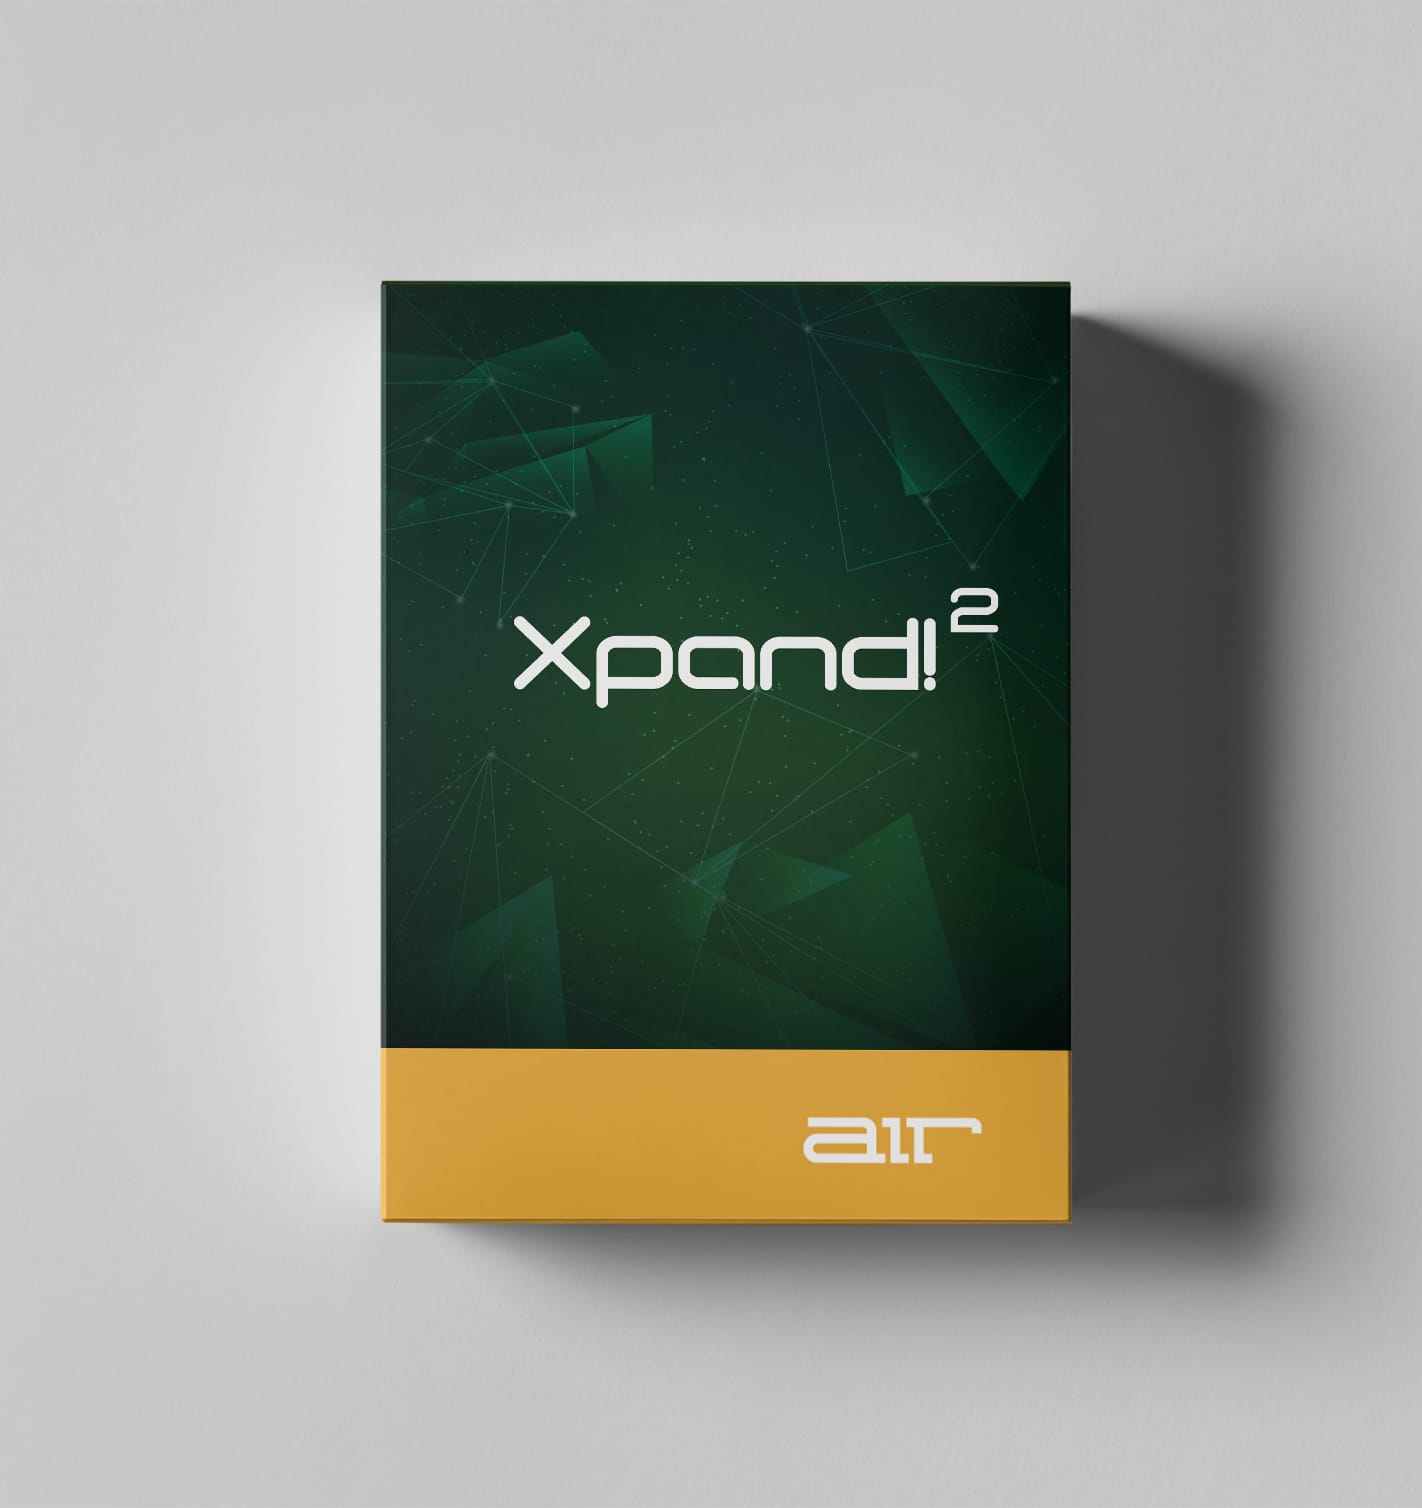 Xpand v2.2.7 Full Cracked 2021 Full Version Free Download